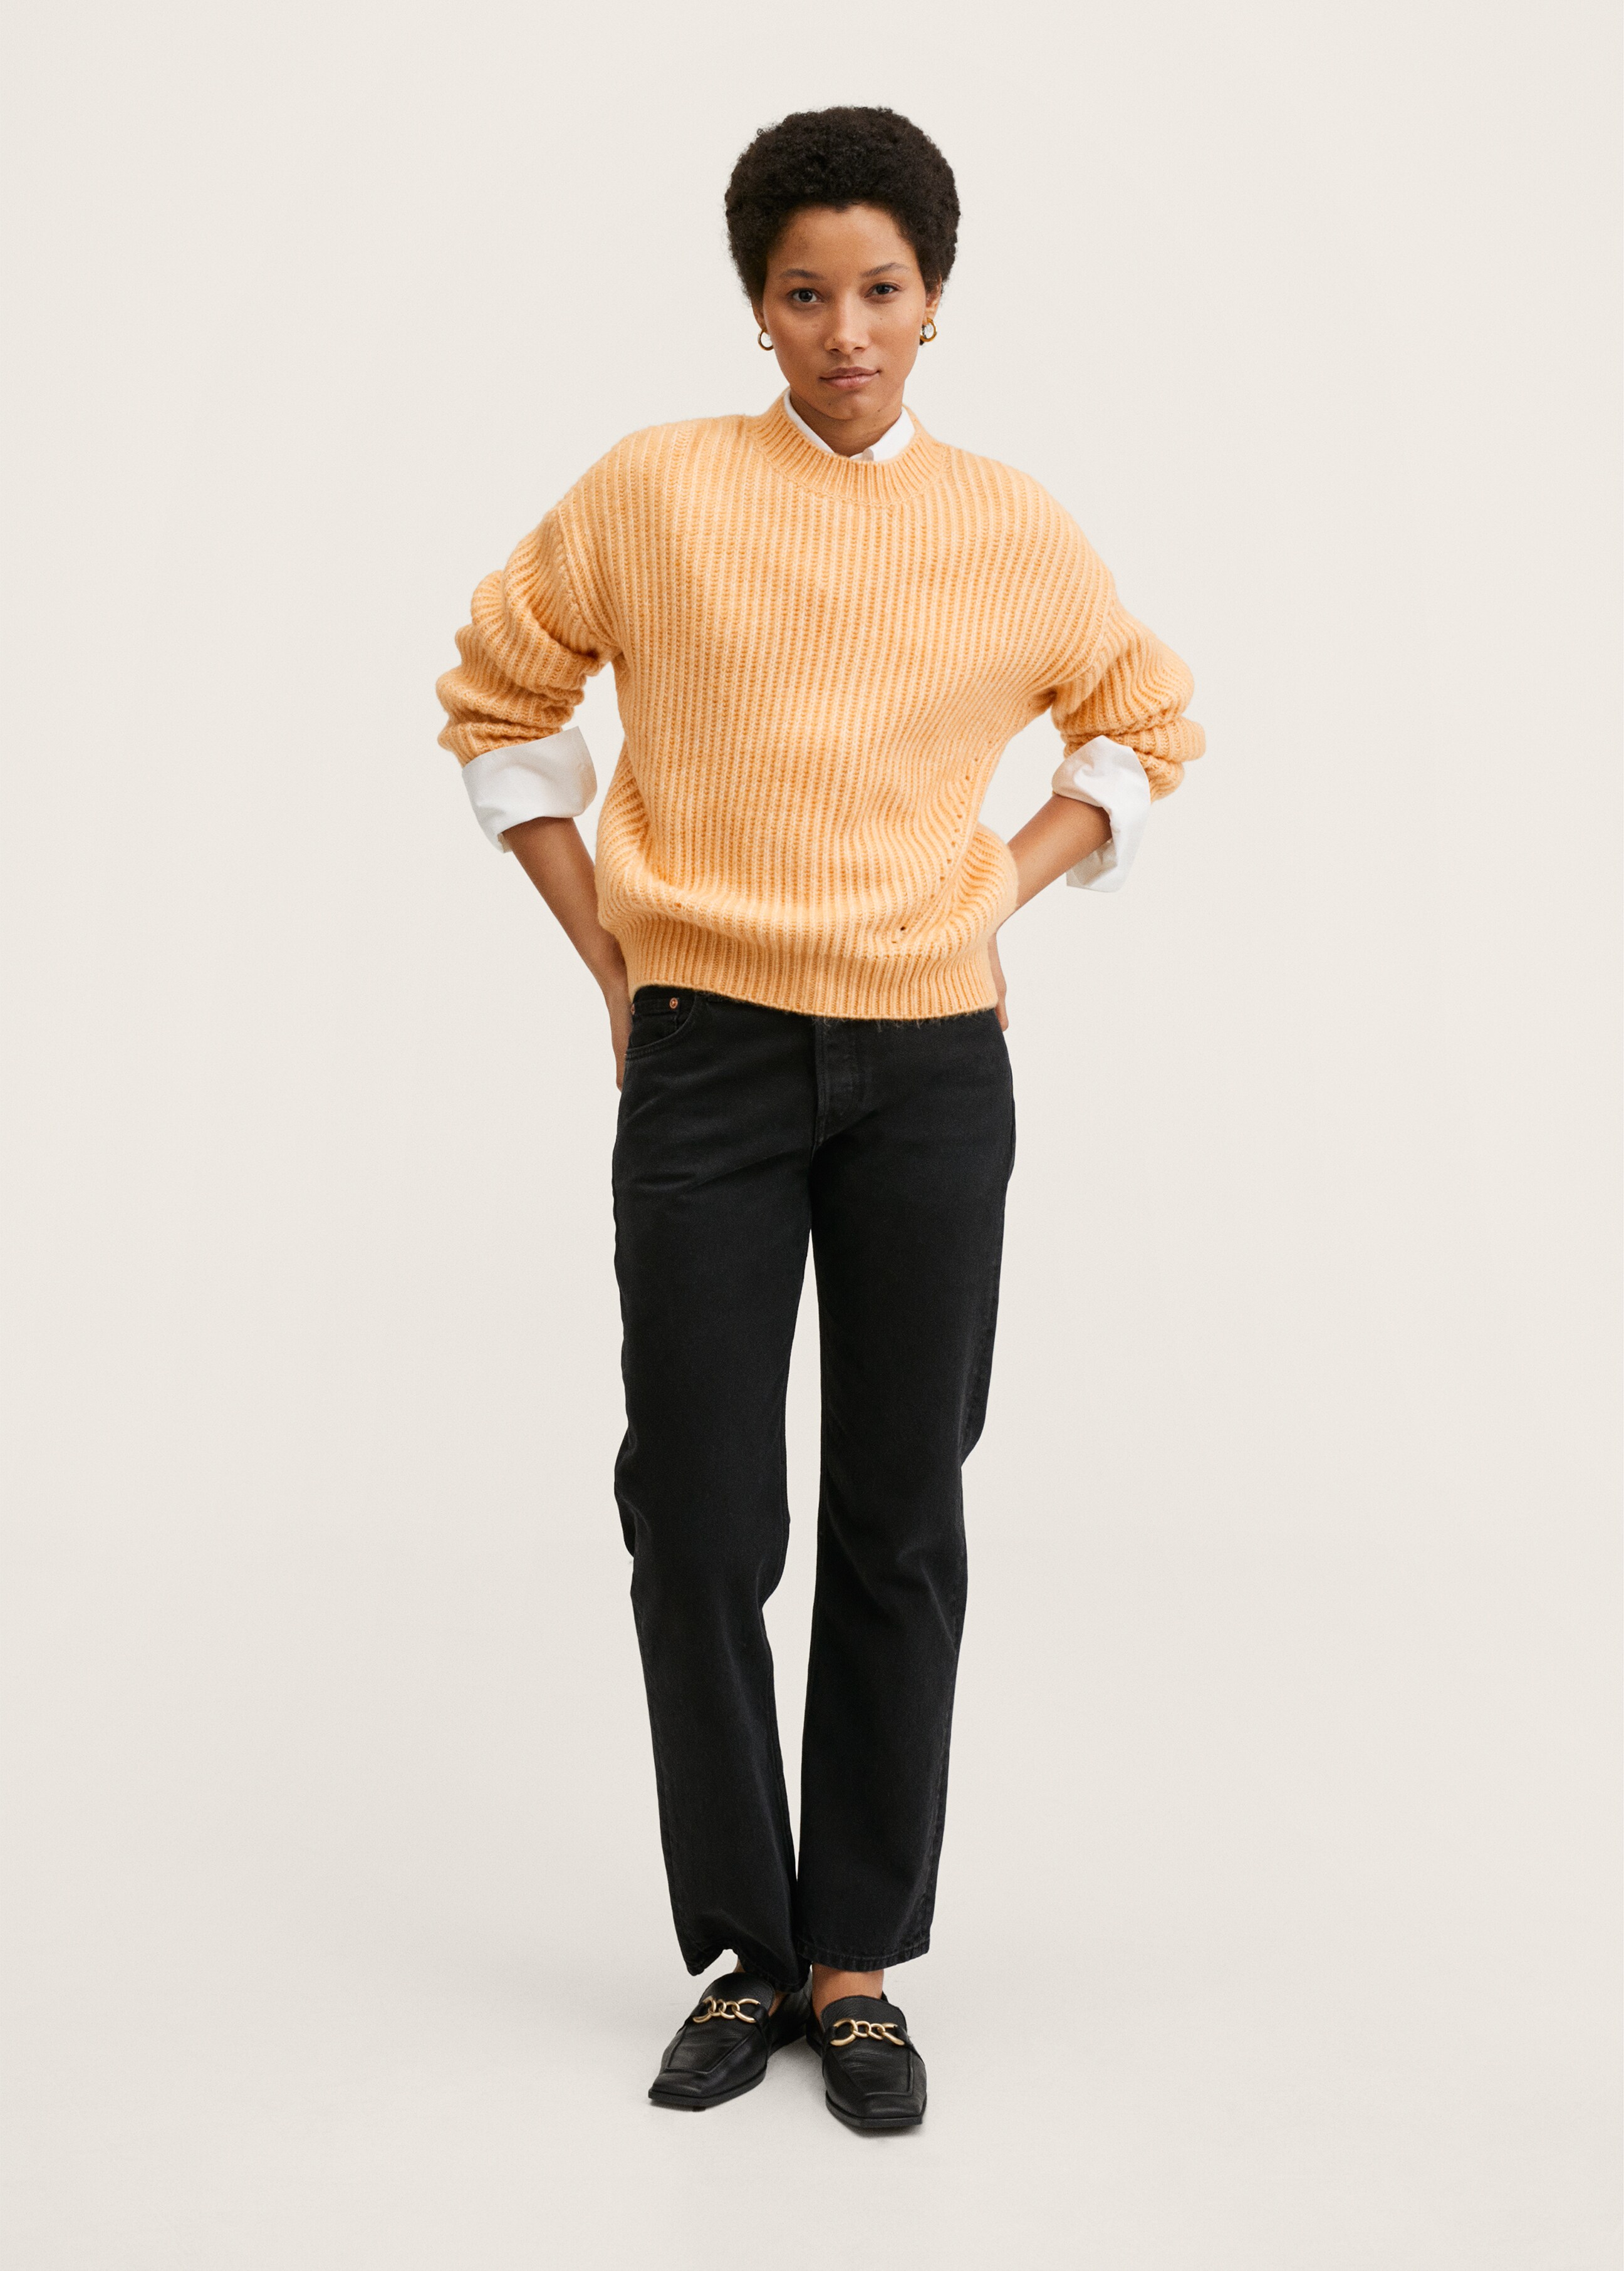 Chunky-knit sweater - General plane